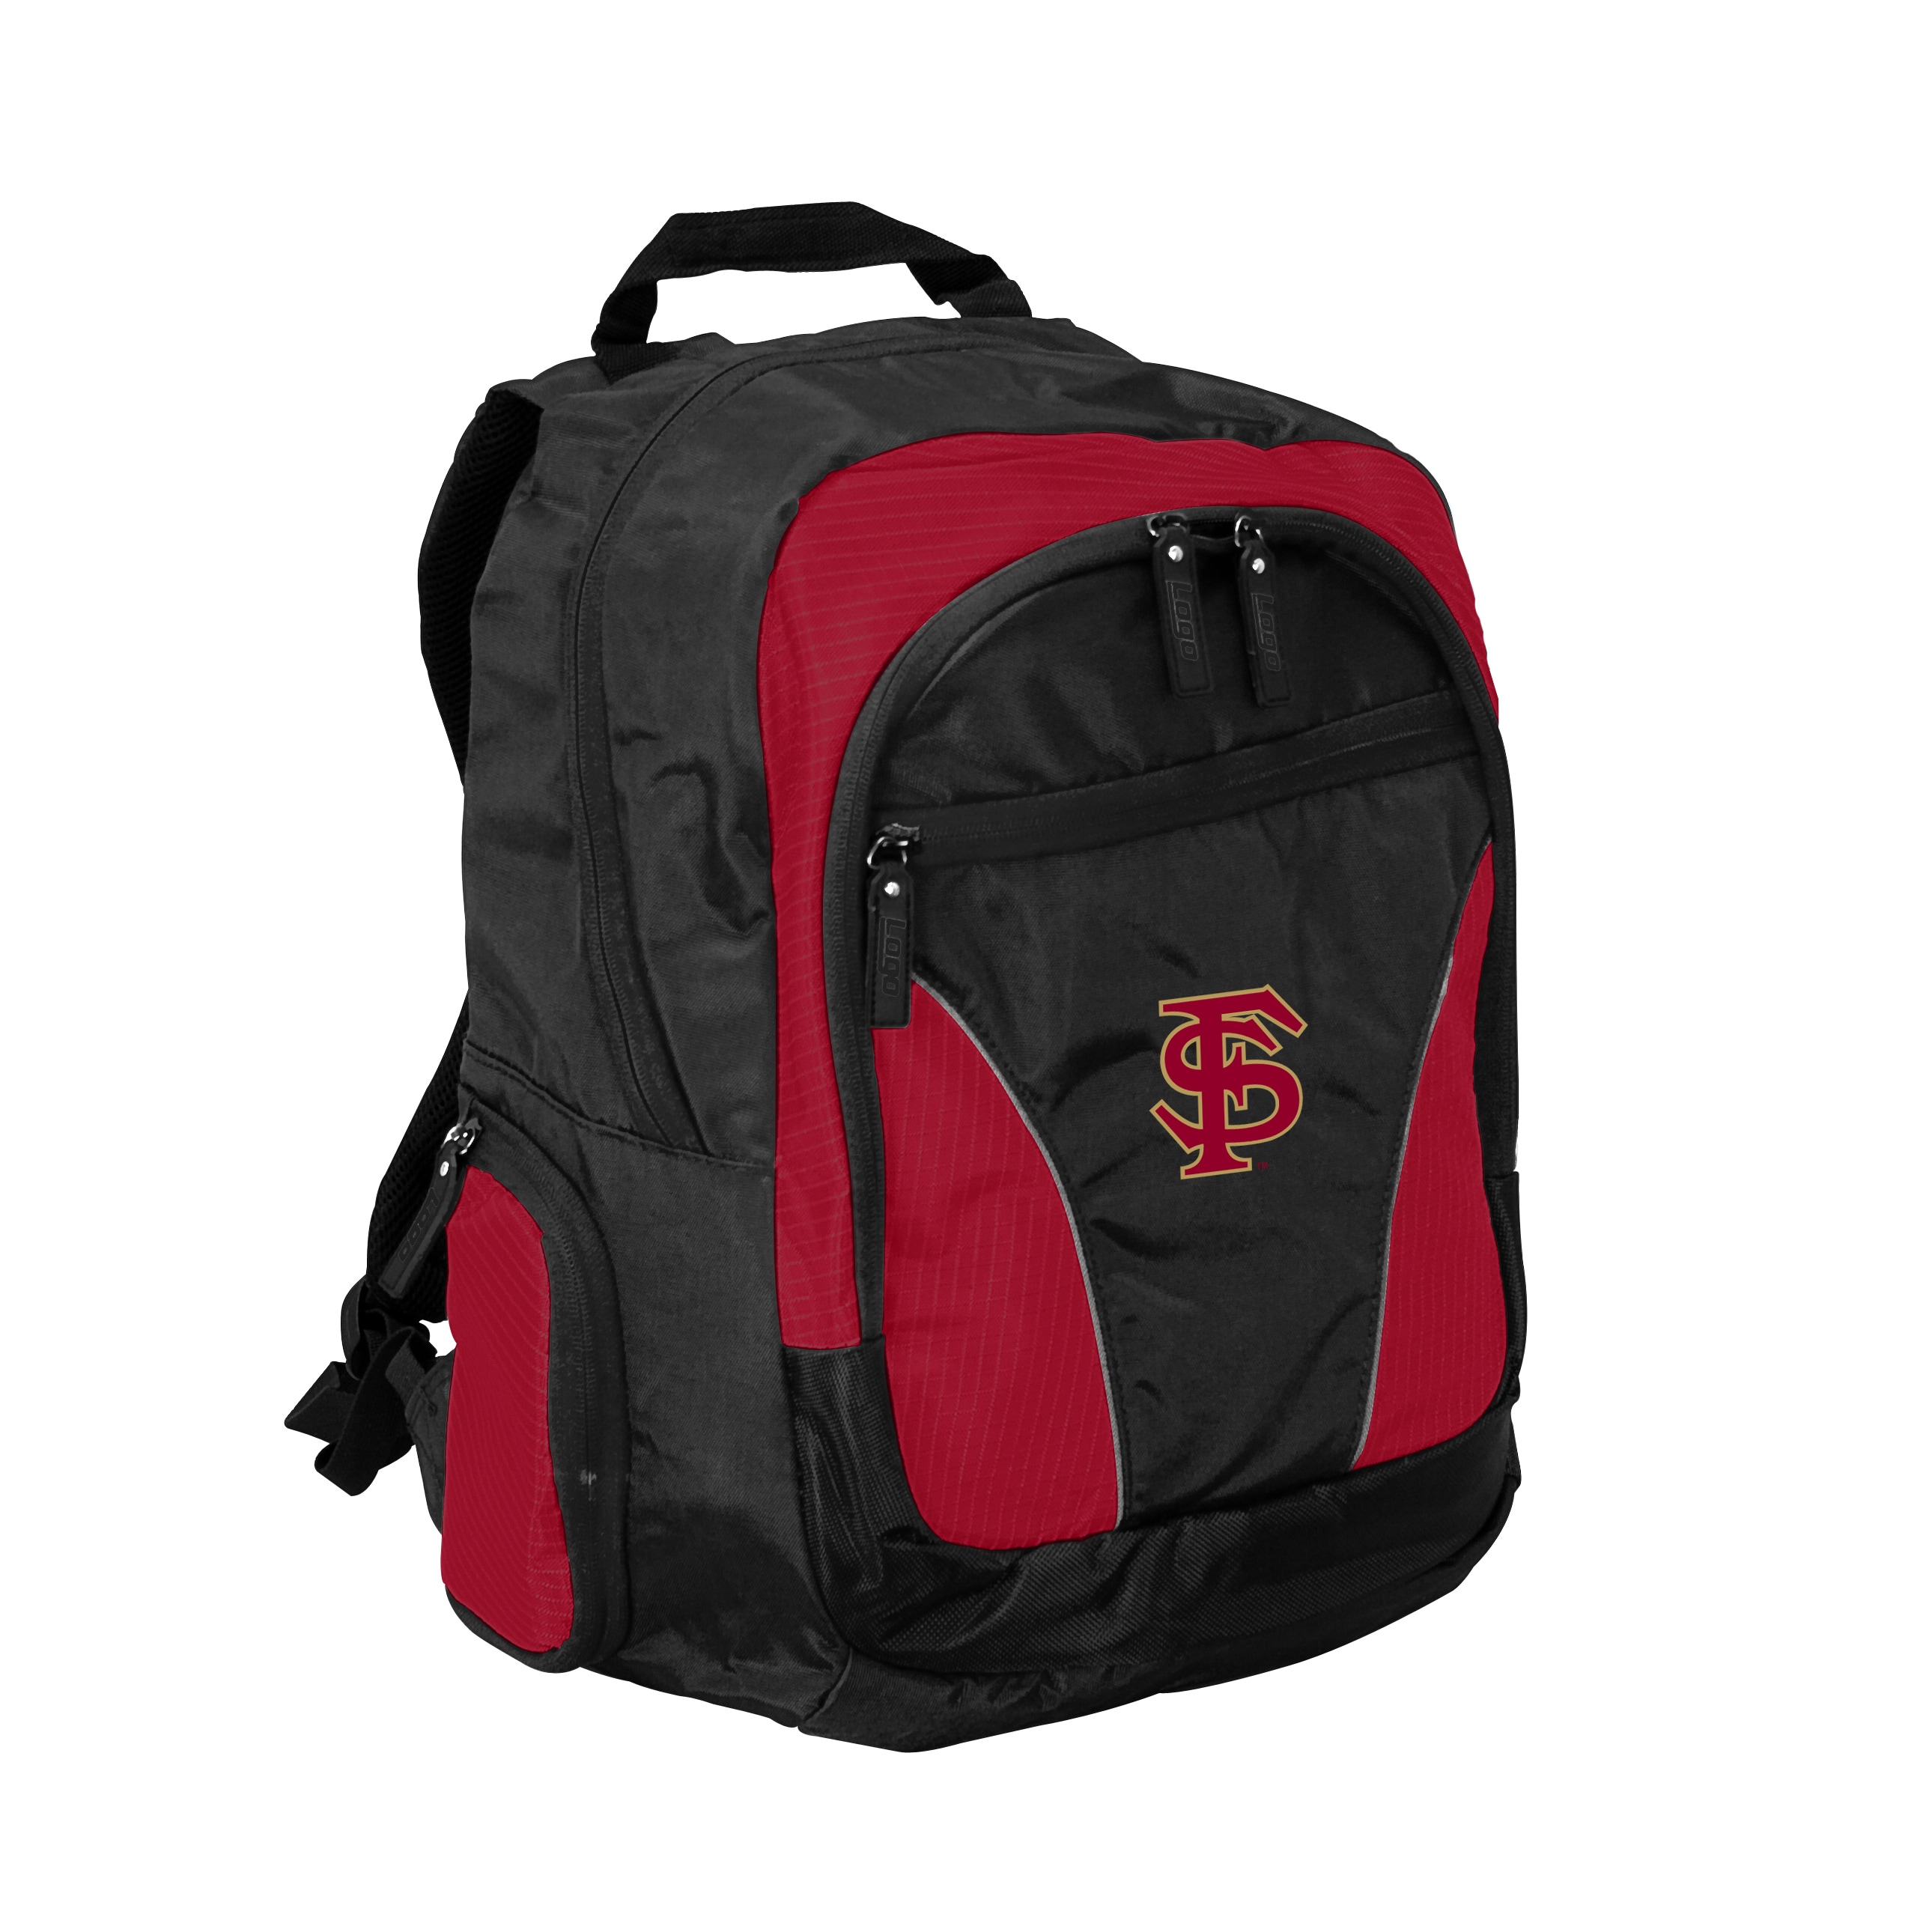 Florida State Seminoles 17 Inch Laptop Backpack Compare $45.31